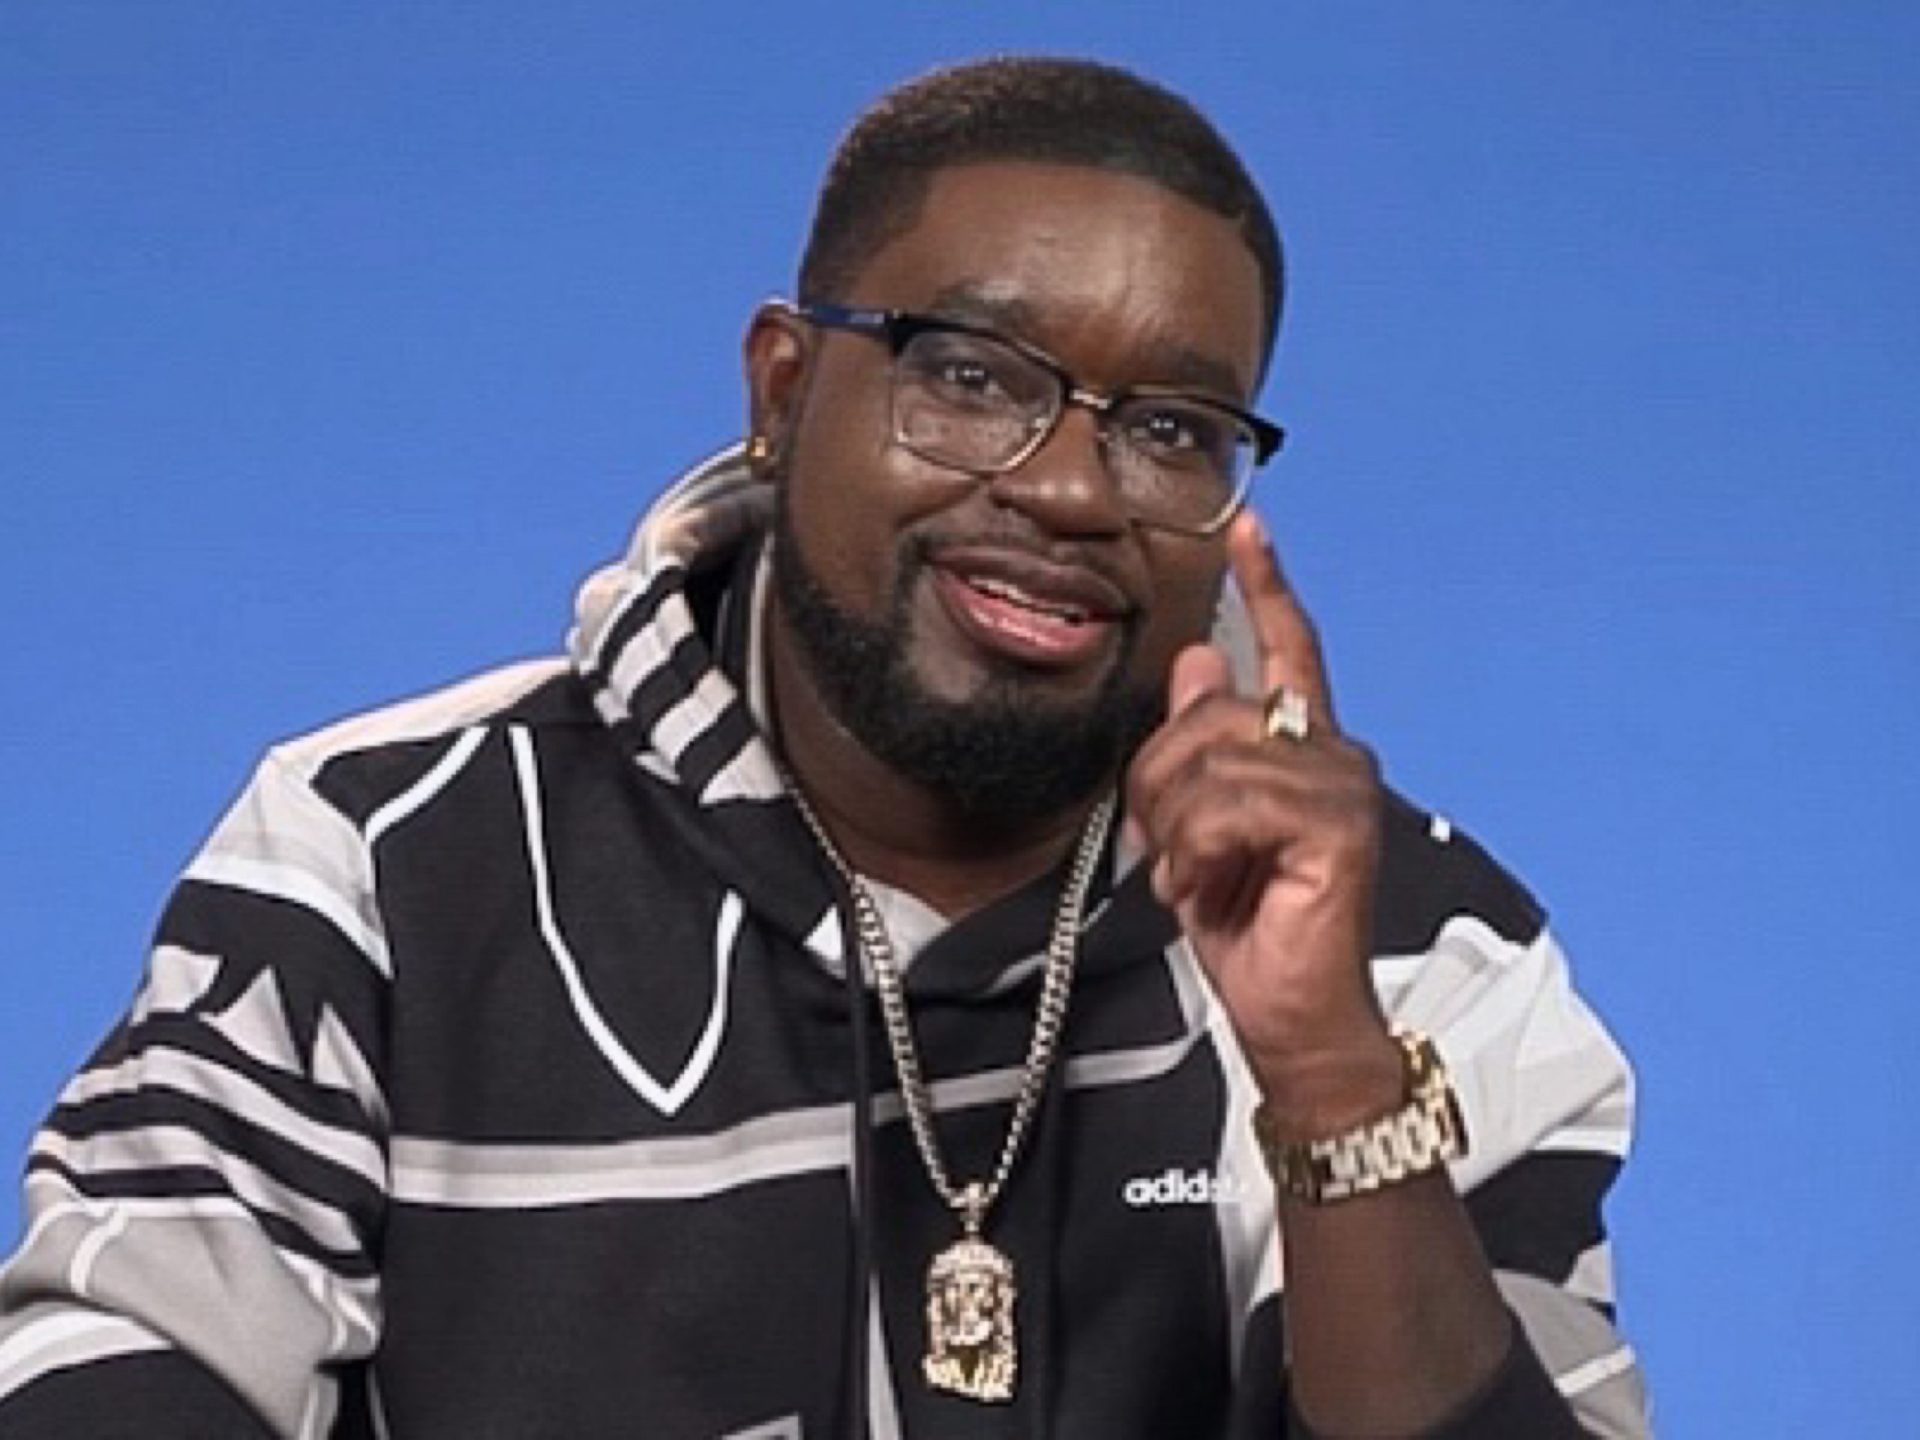 Comedian-actor Lil Rel Howery is the best buddy to have in 'Free Guy'